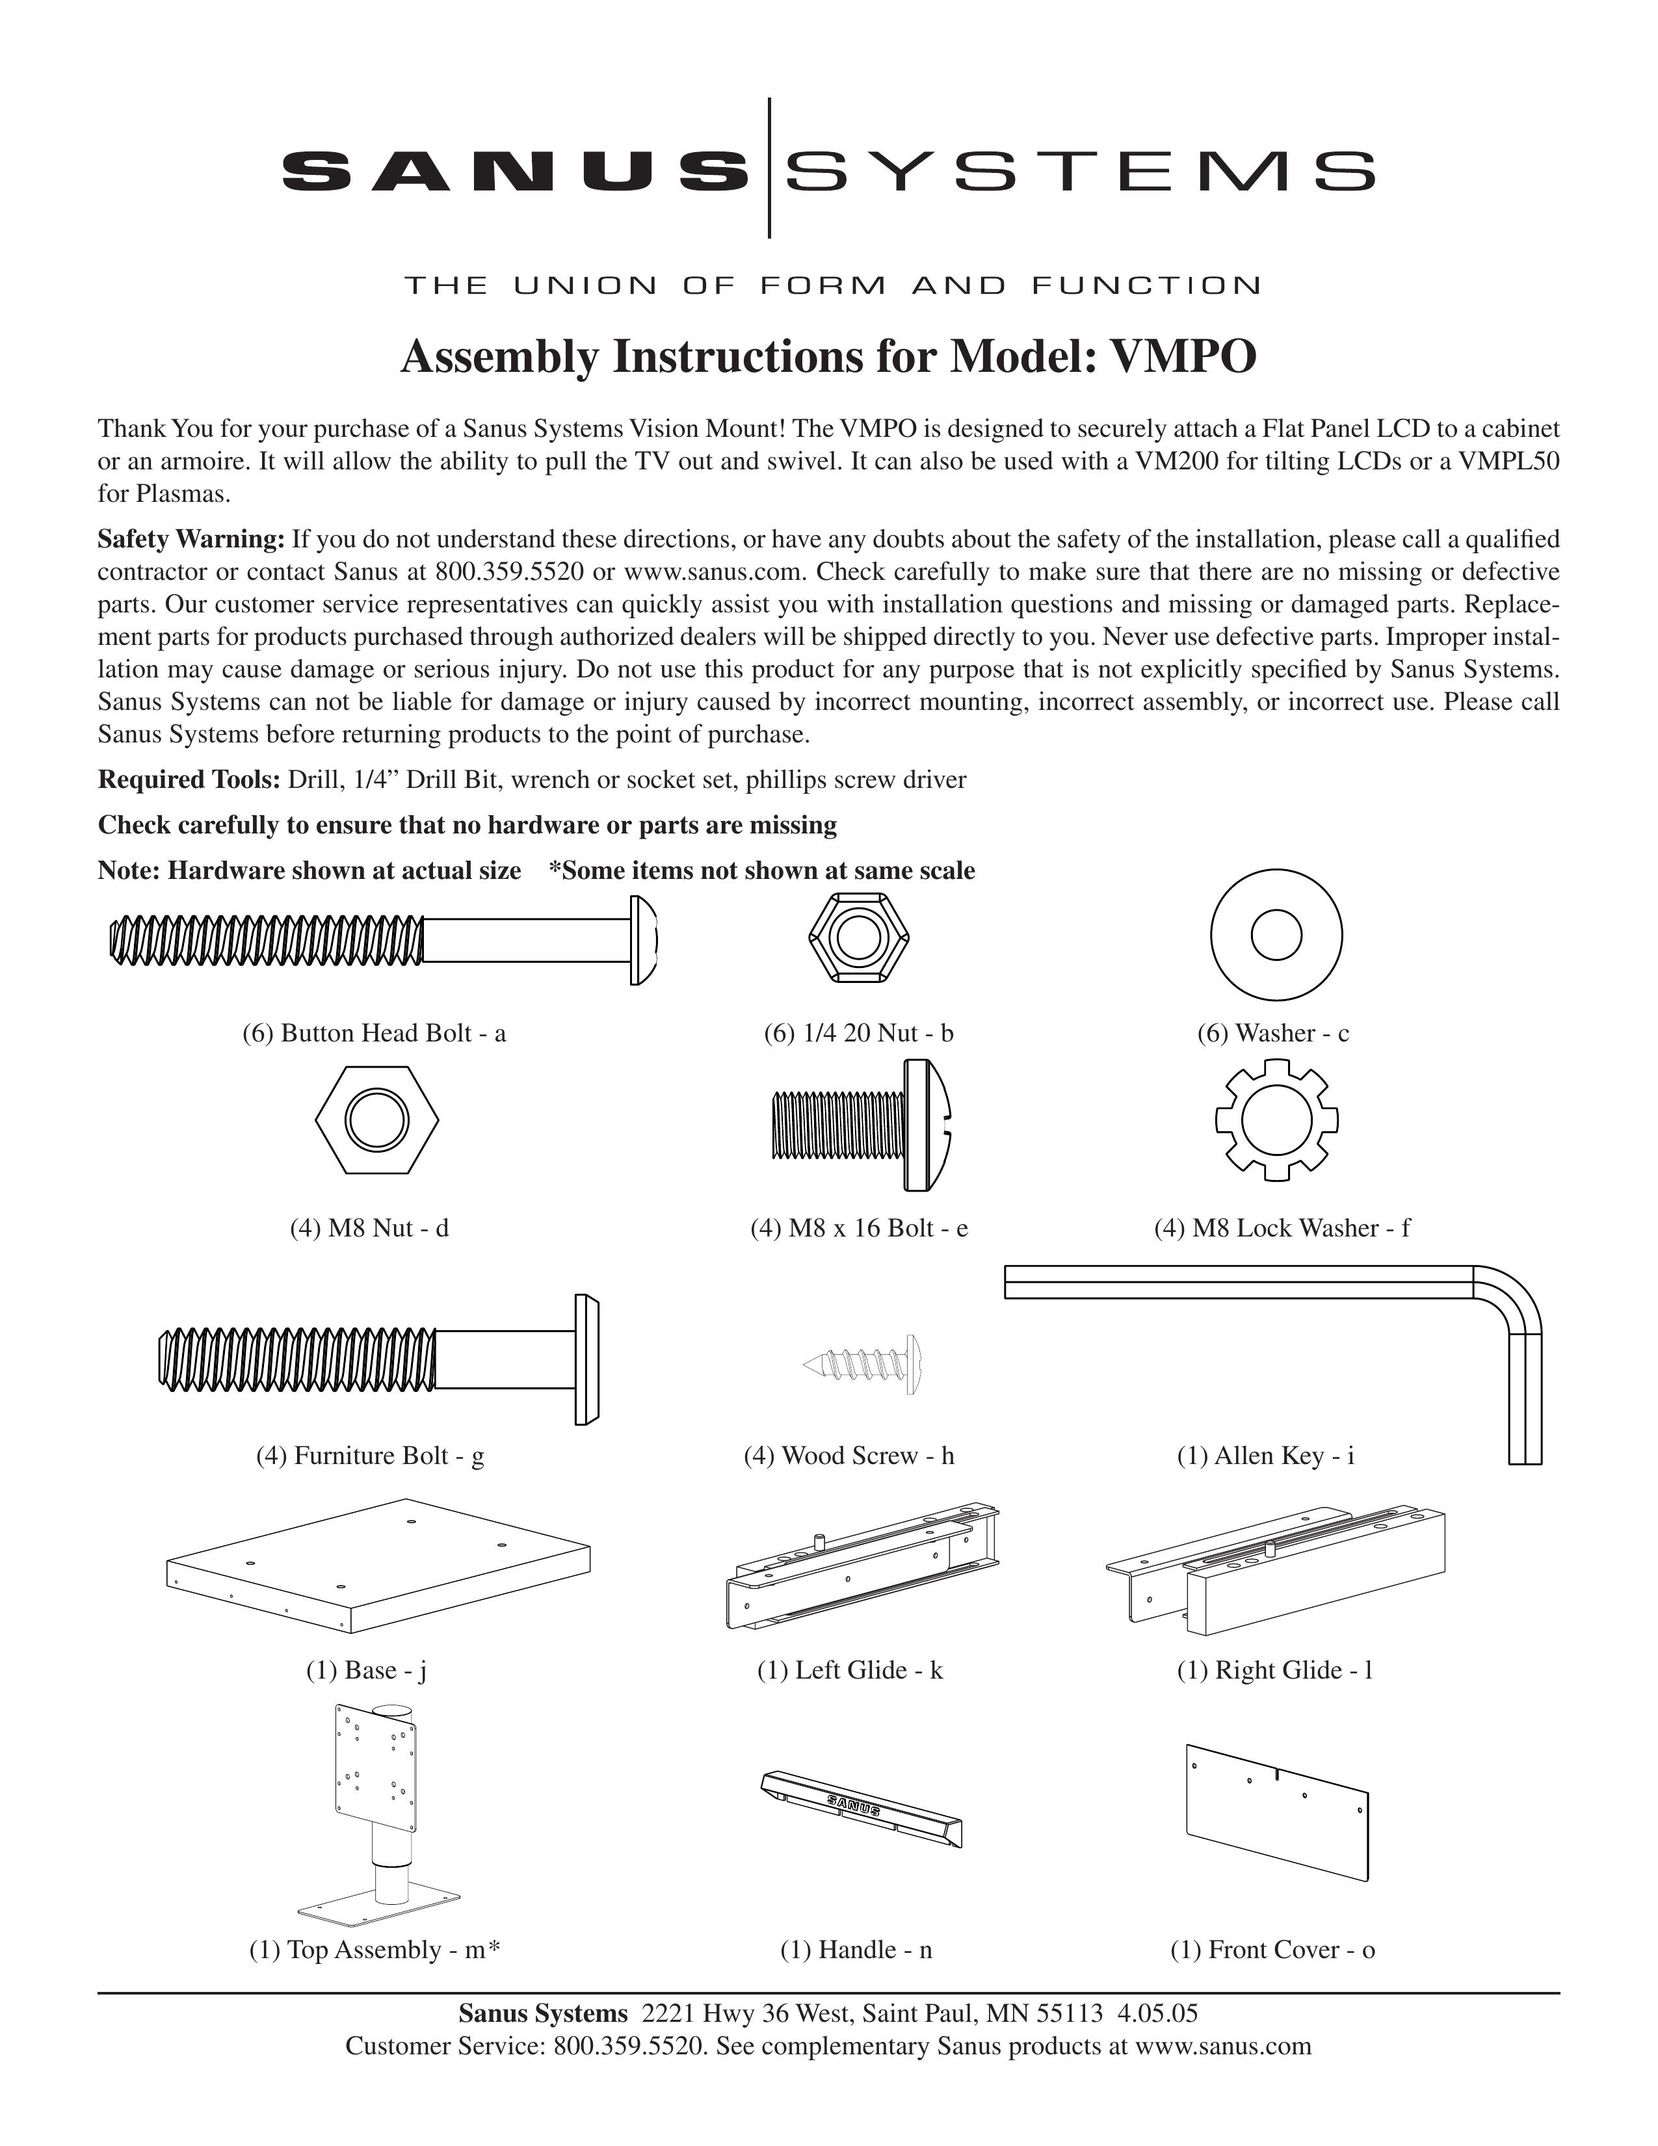 Sanus Systems VMPO Cookware User Manual